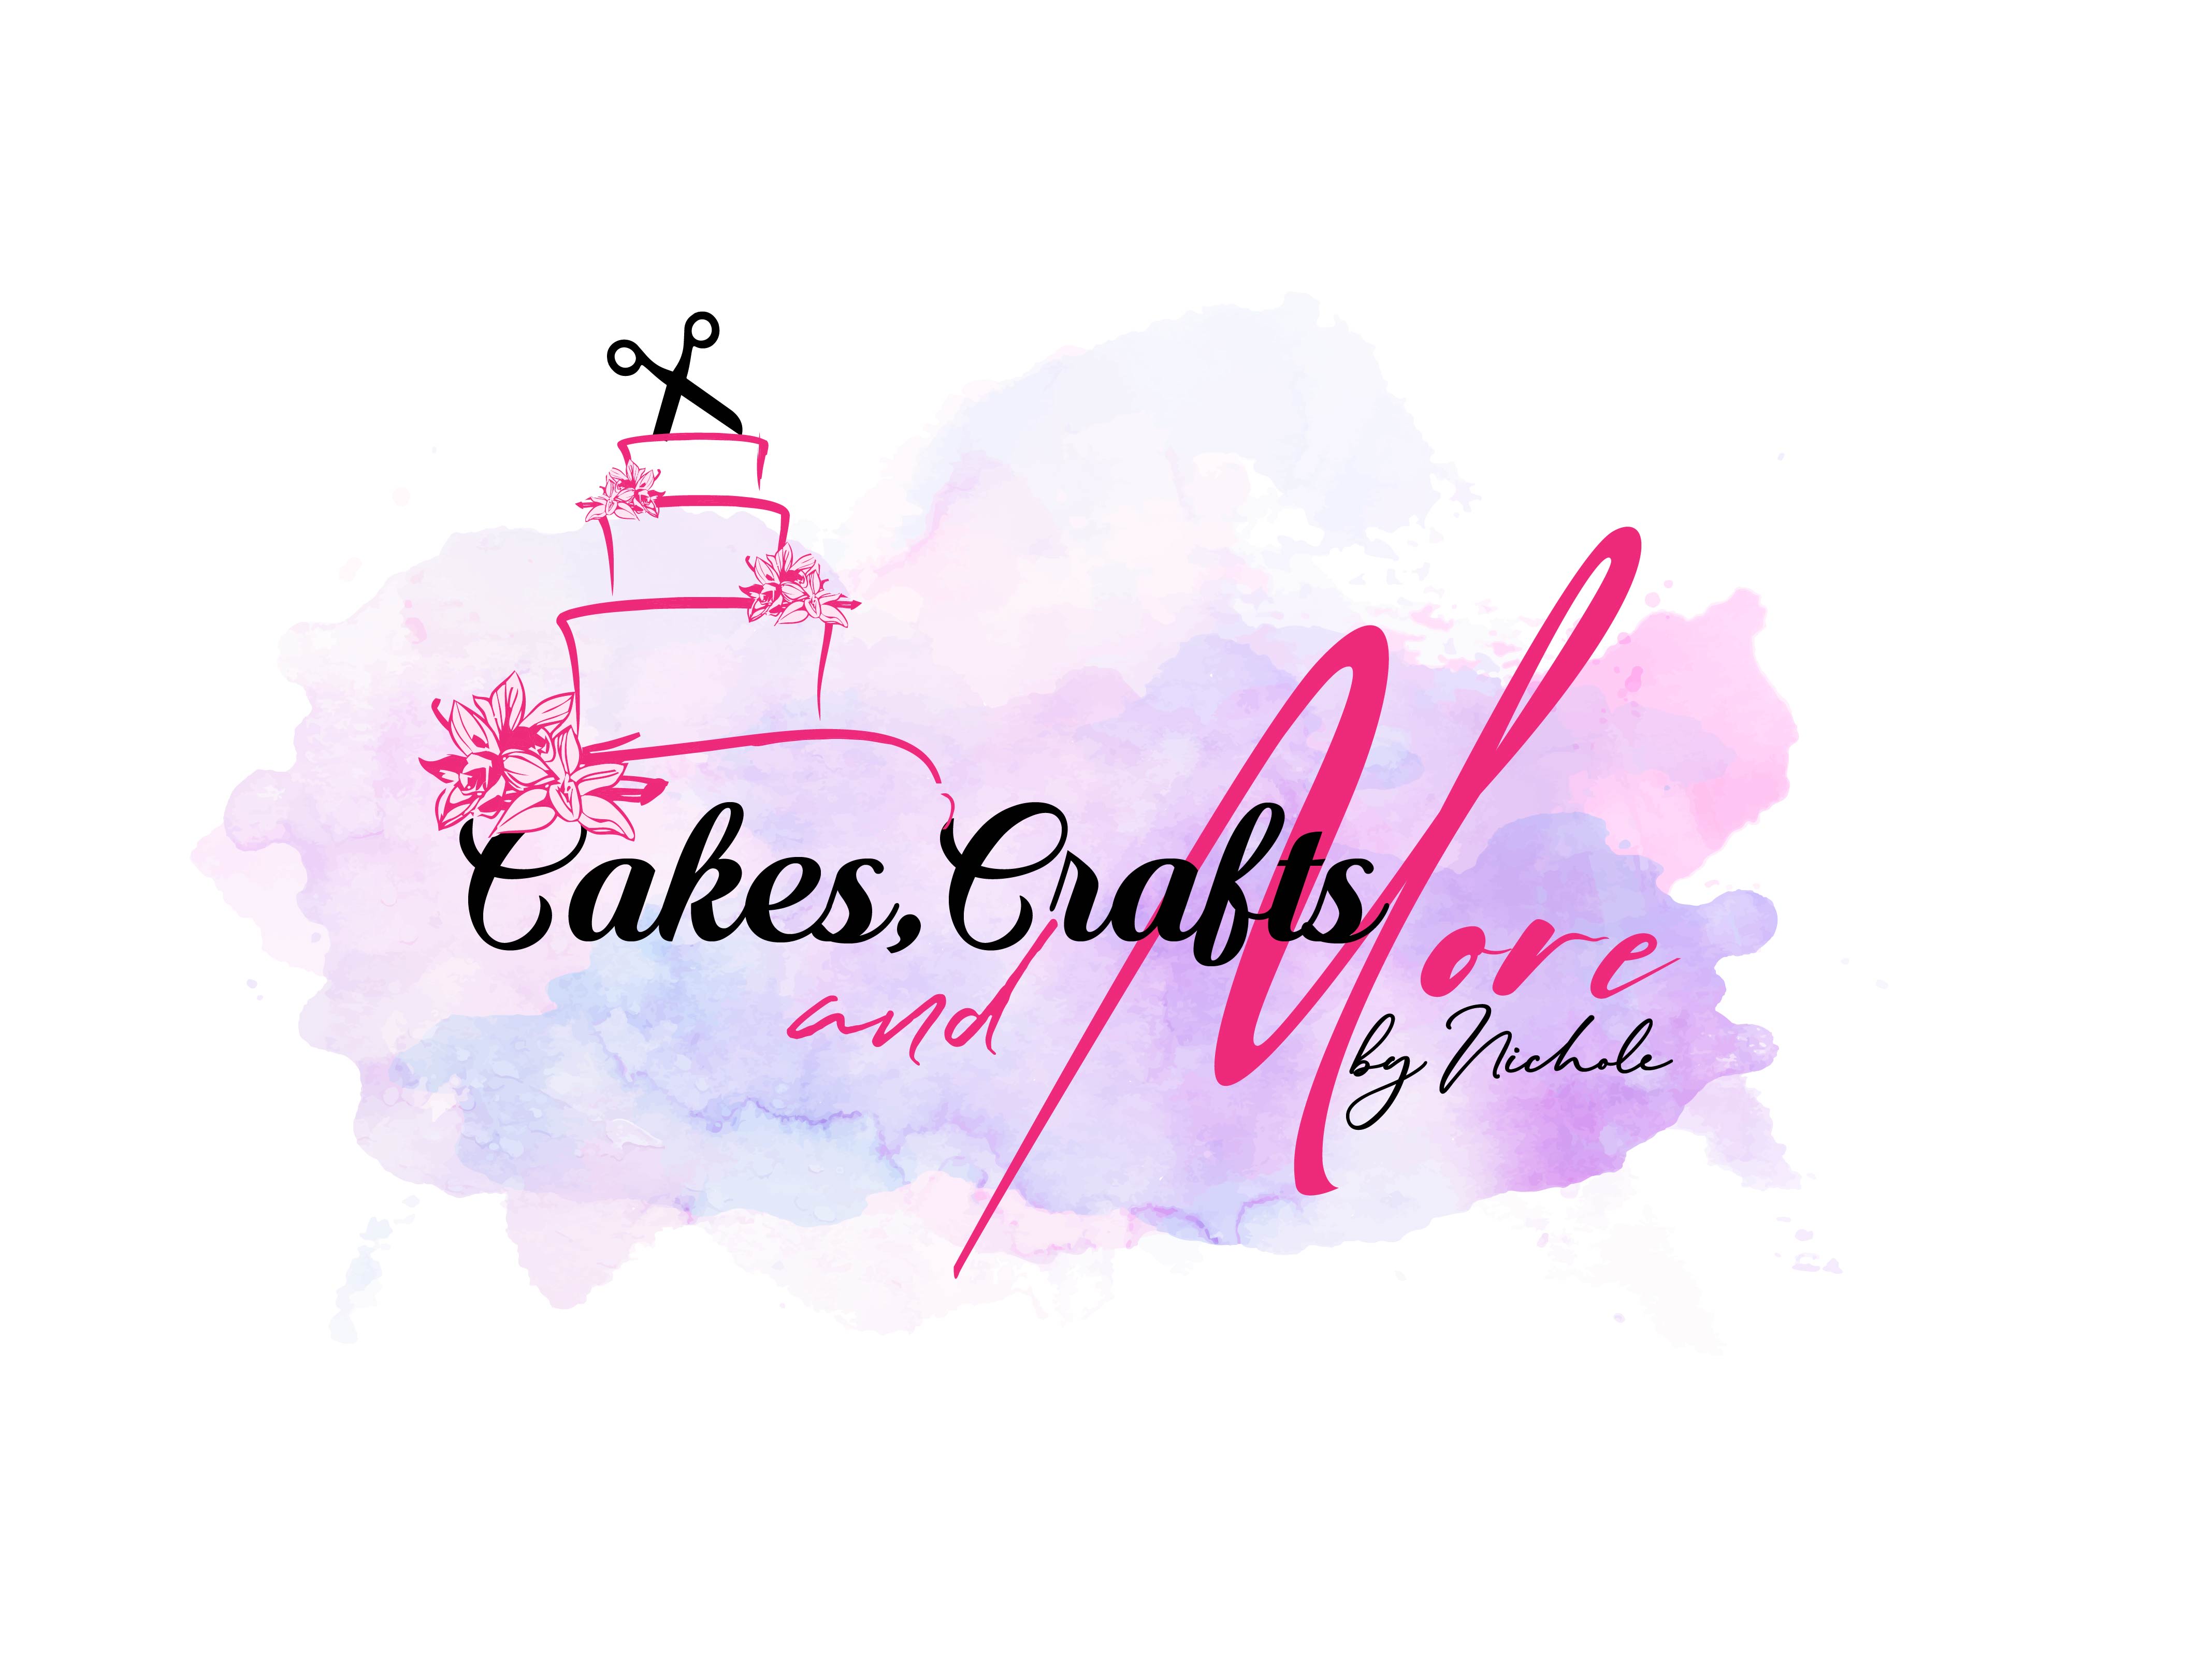 Cakes, Crafts and More by Nichole